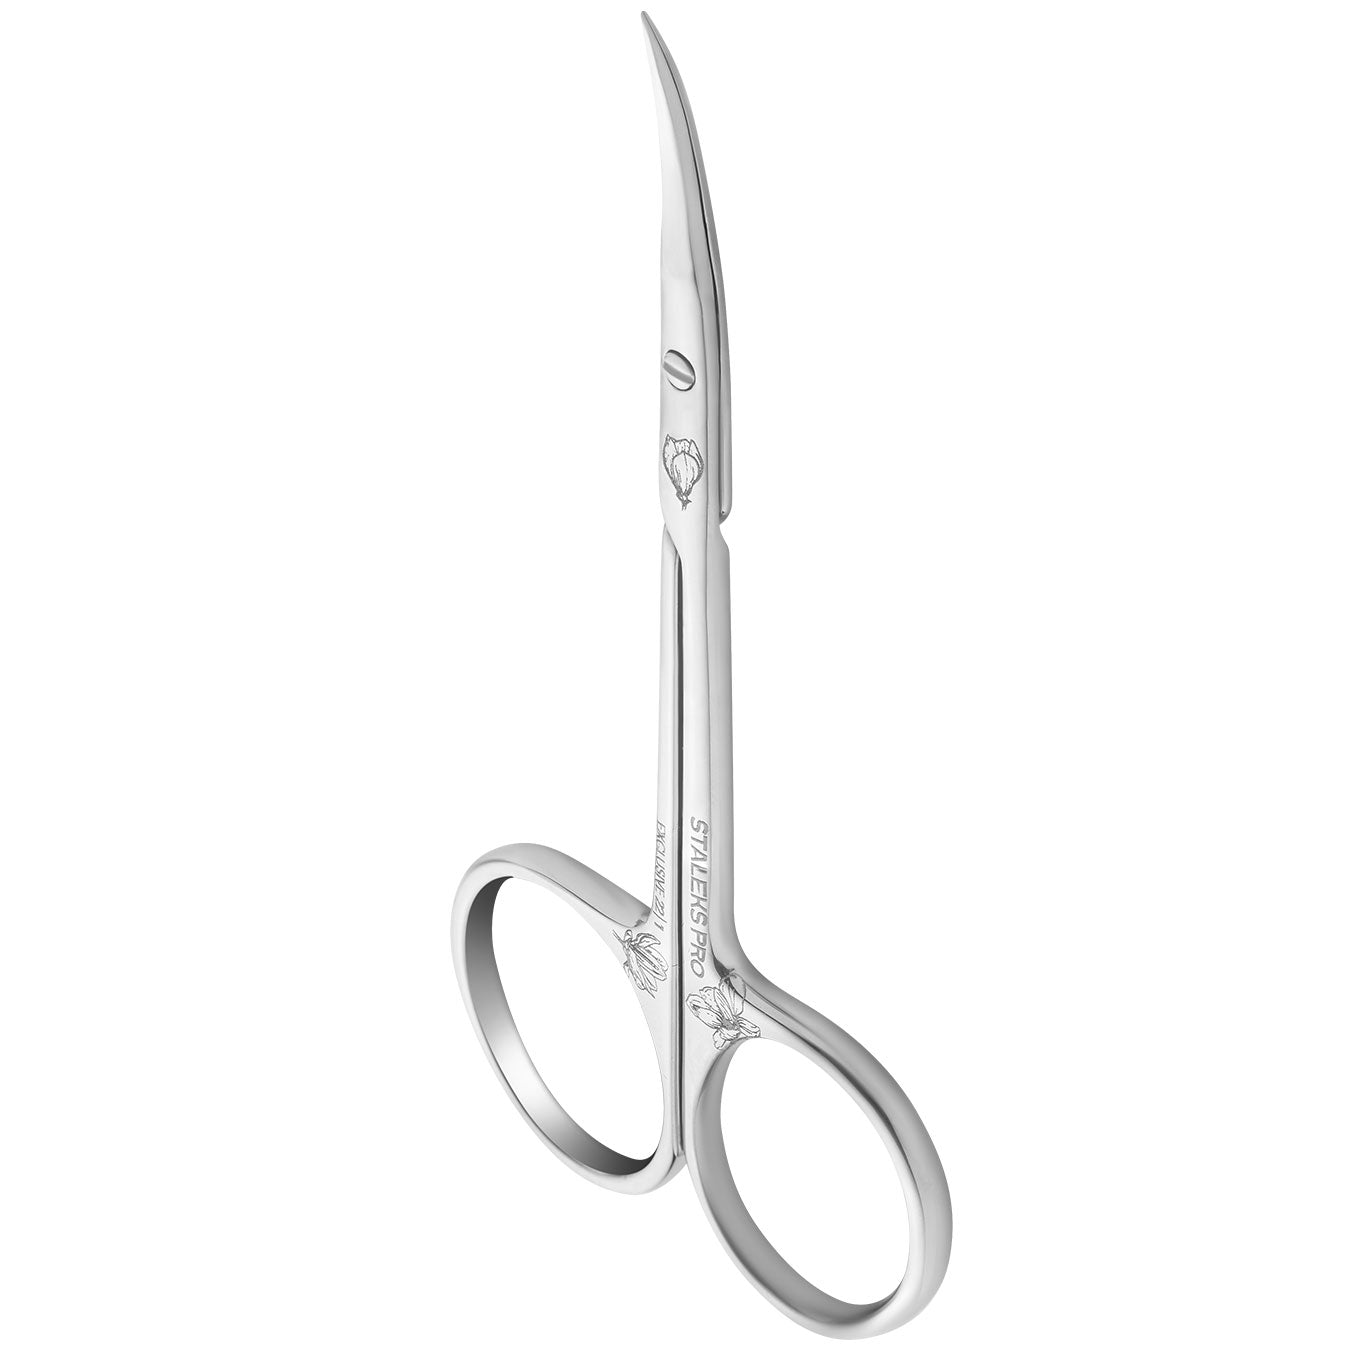 Henbor Professional Manicure Extra Pointed Cuticle Scissors Perfect cutters  - Premium Quality Manicure Scissors for Precision Cut, Handcrafted in